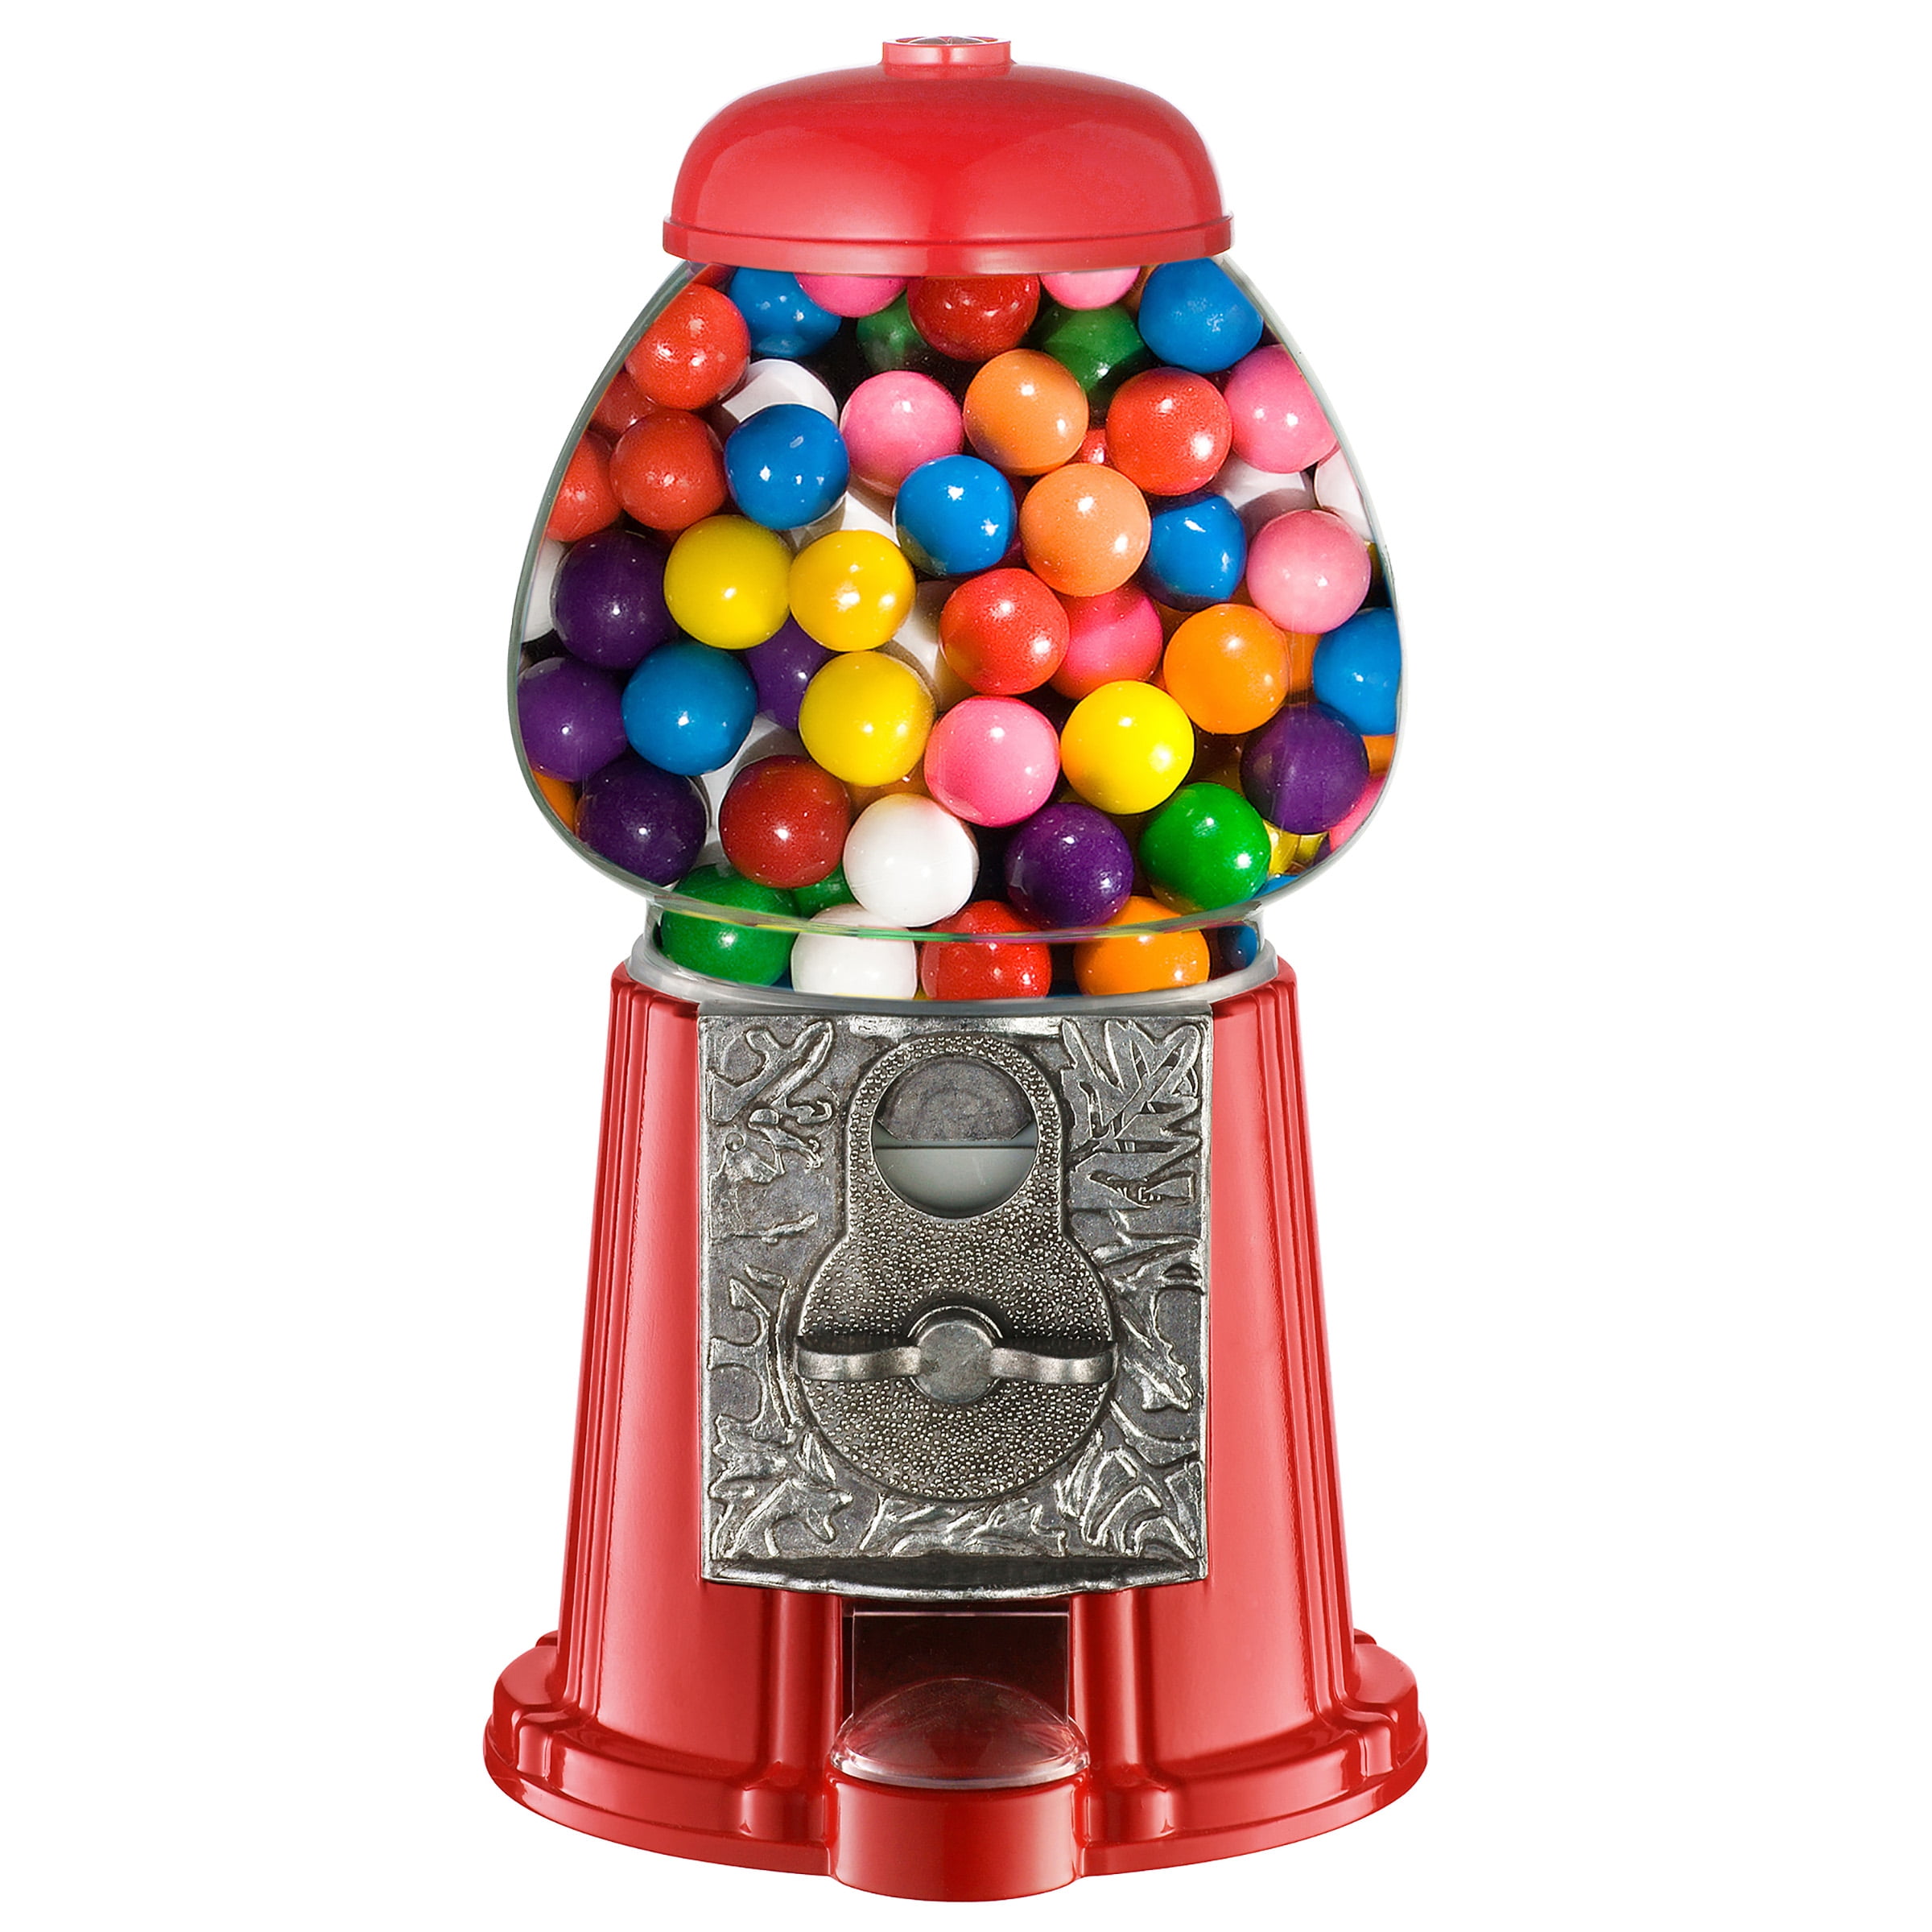 Texaco gas vintage gumball machine candy machine game room accessories bar gift 